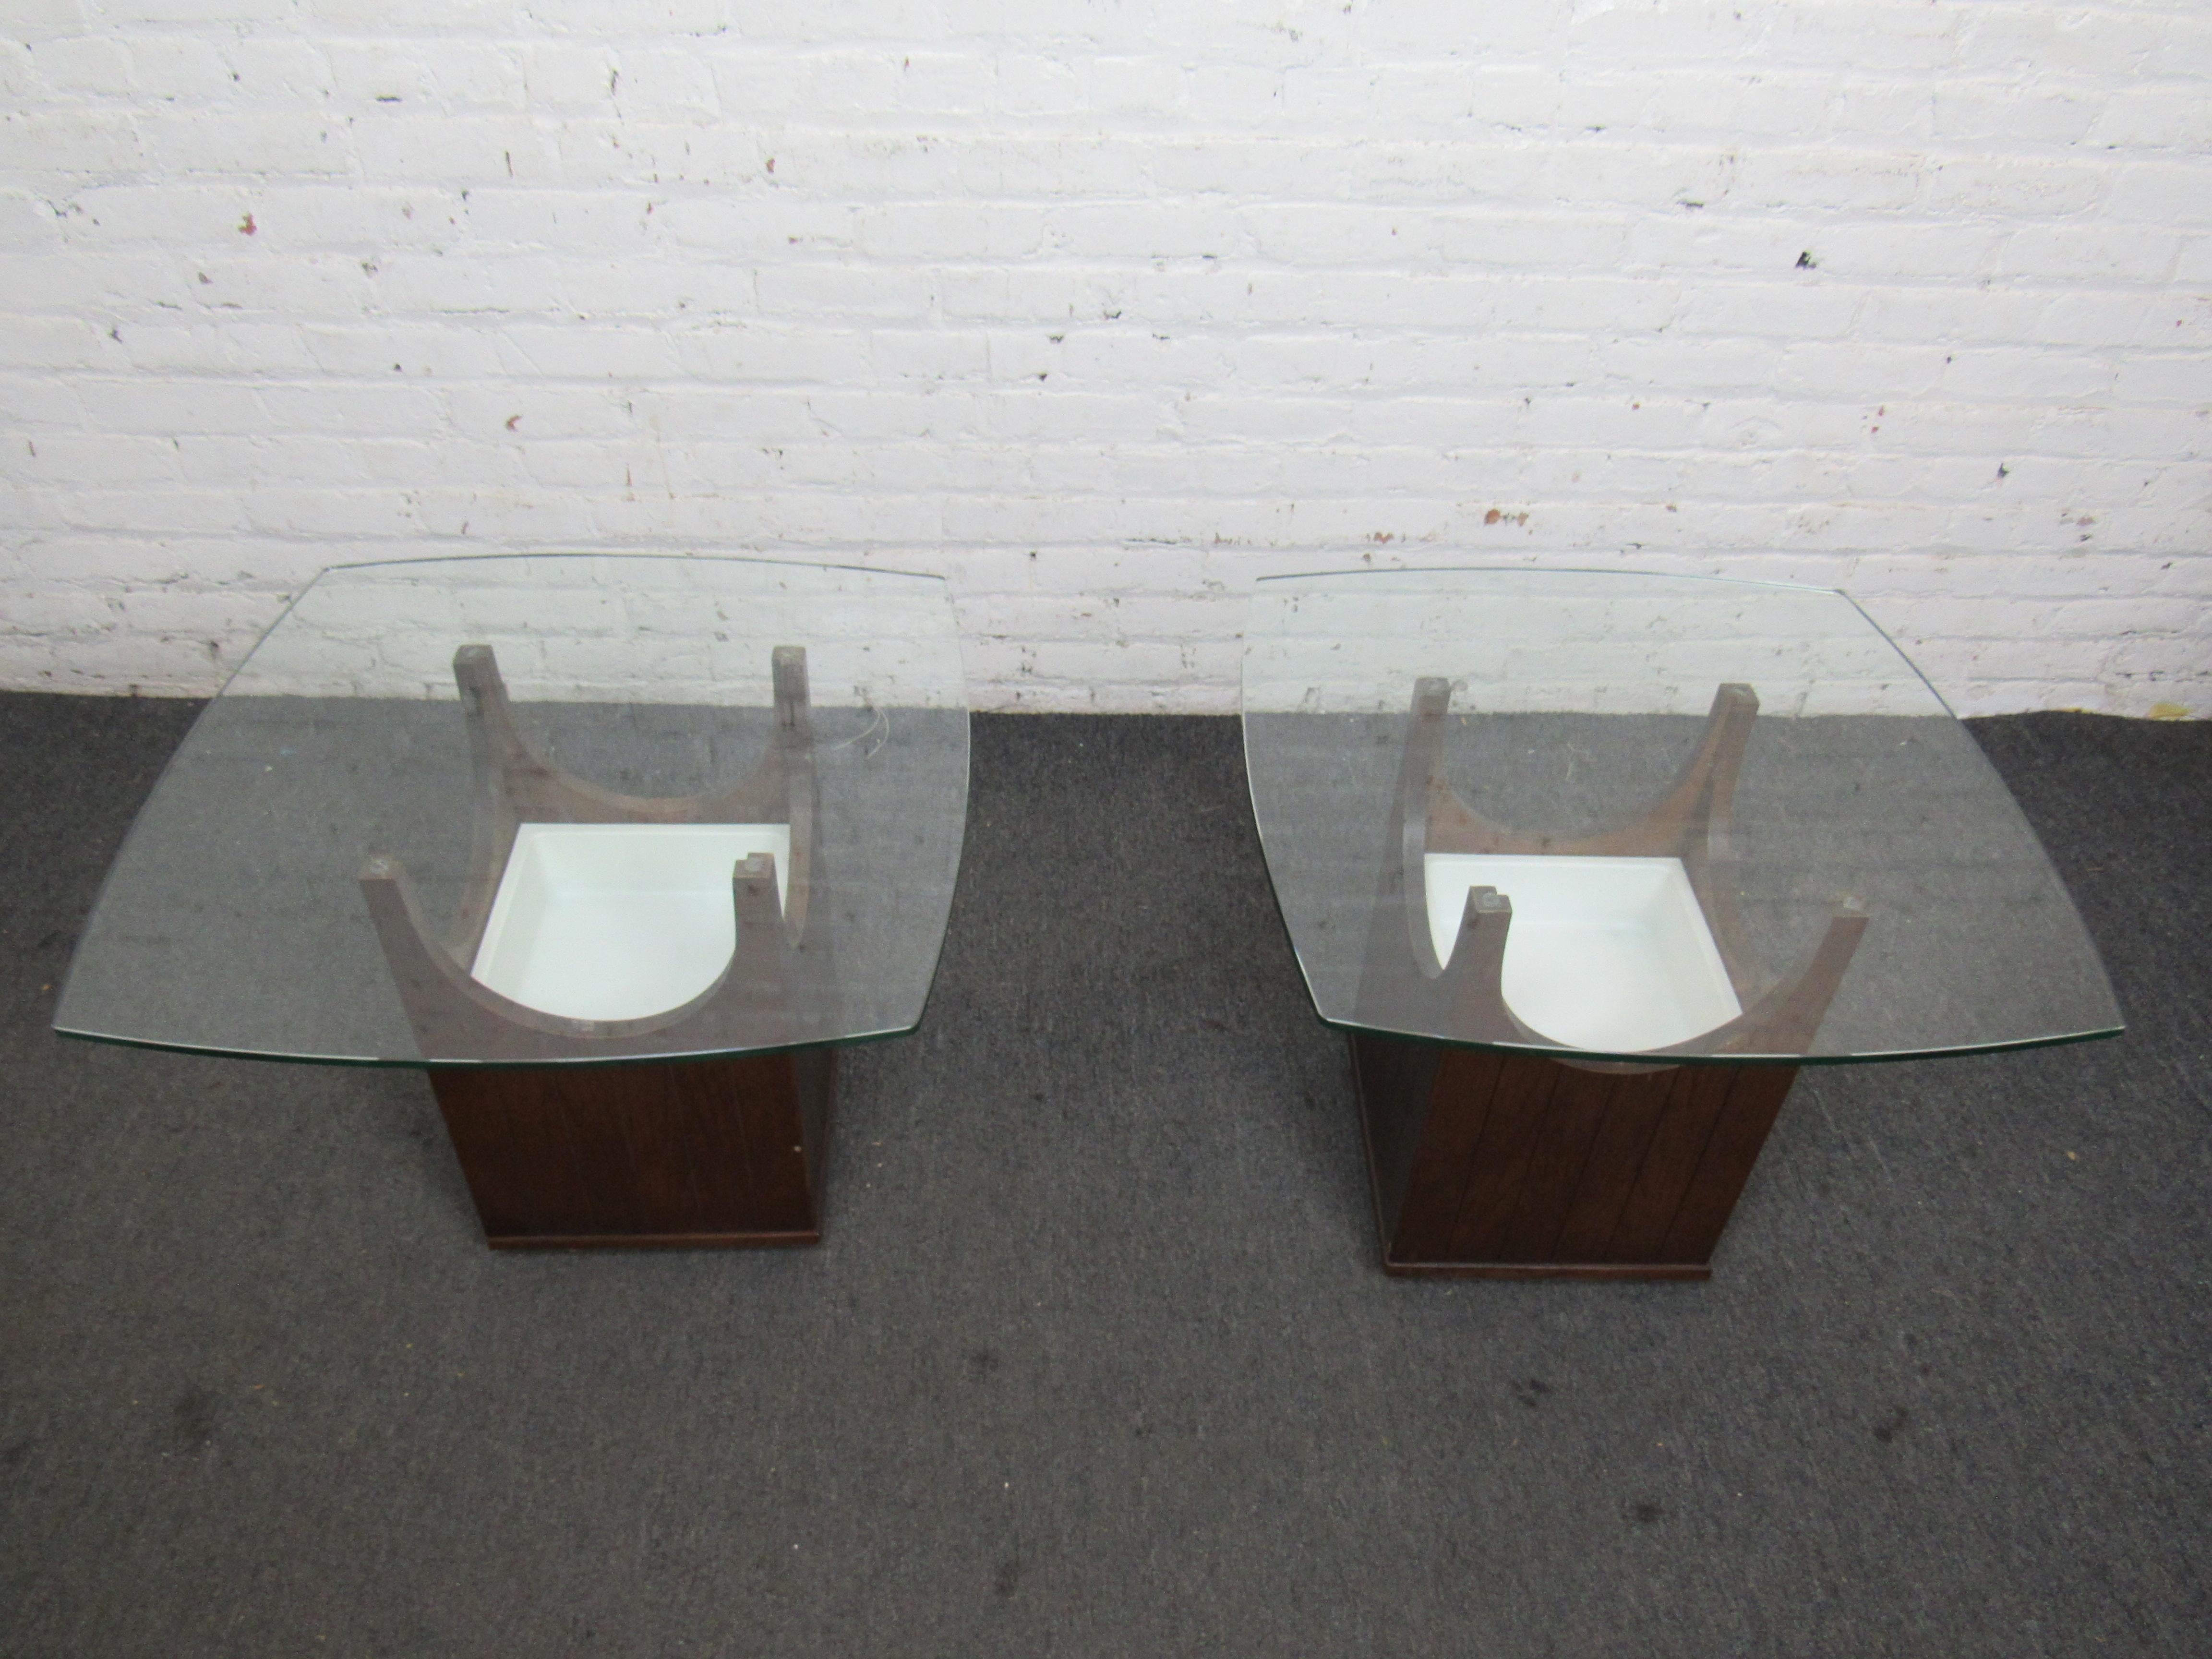 Interesting and sizable pair of glass side tables. The small sunken white space under the glass can be used for a little storage. 
(Please confirm item location - NY or NJ - with dealer).
 